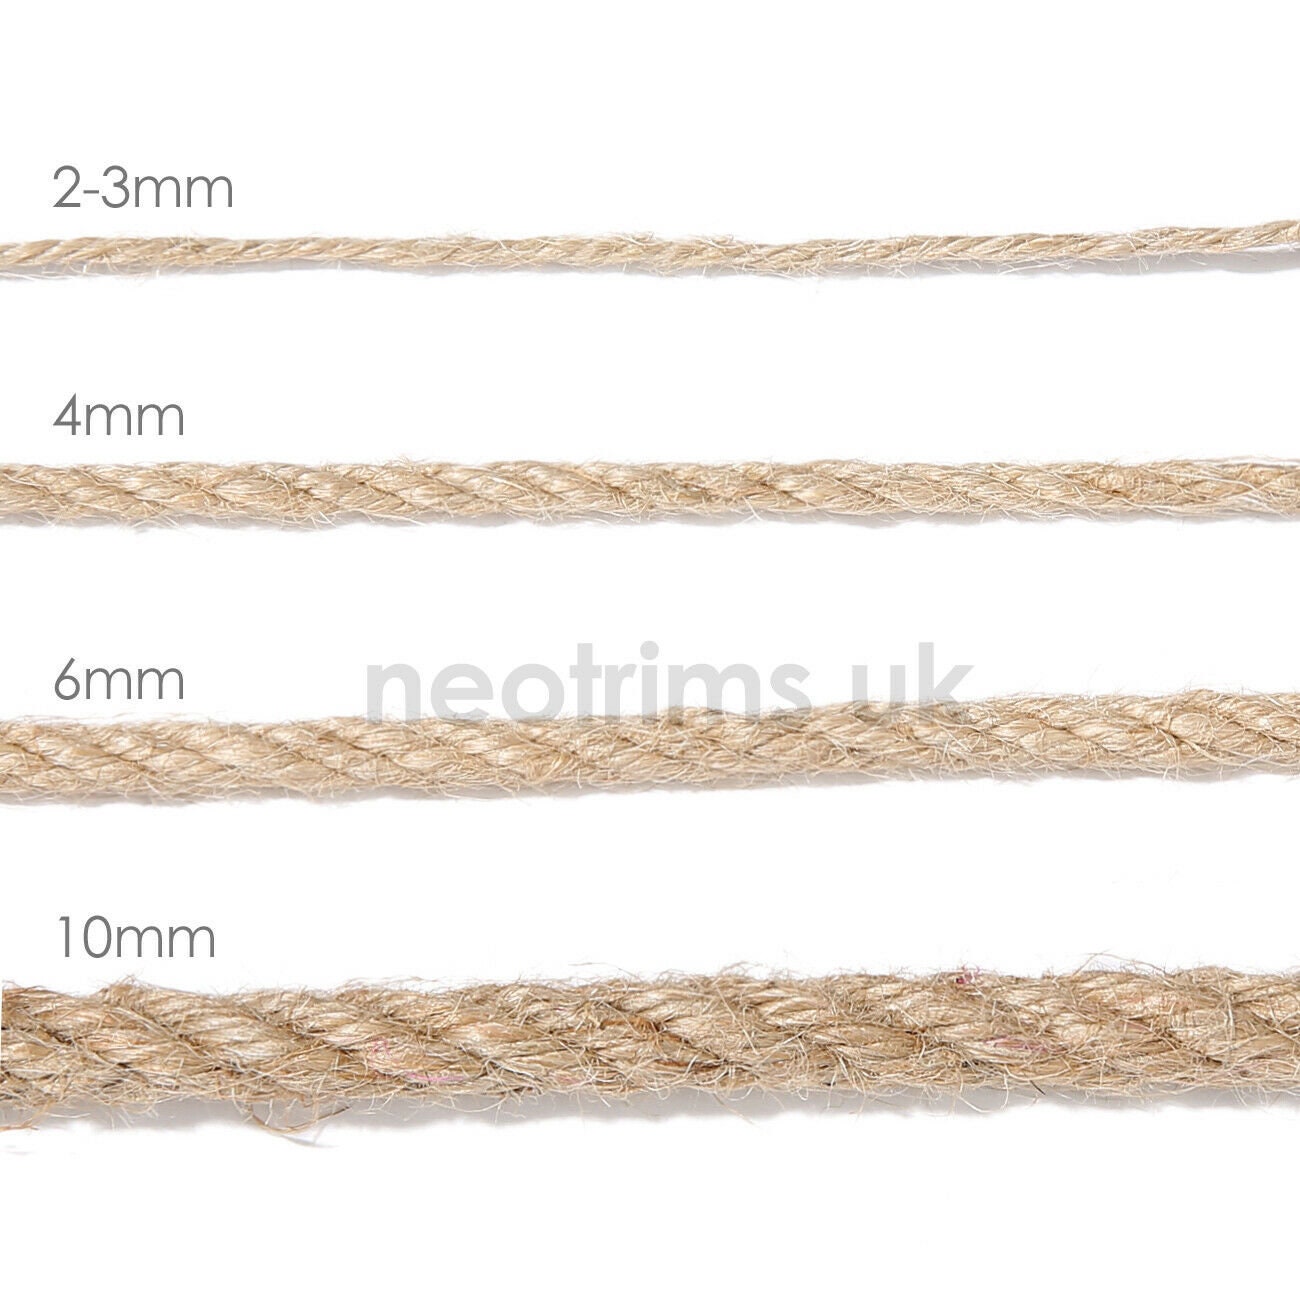 Rophomor 1000FT Jute Twine Rope 3mm 6ply Natural Thick Garden Twine String  Heavy Duty for Gardening Bundling Crafts Arts Gift Brown Jute-03-1000